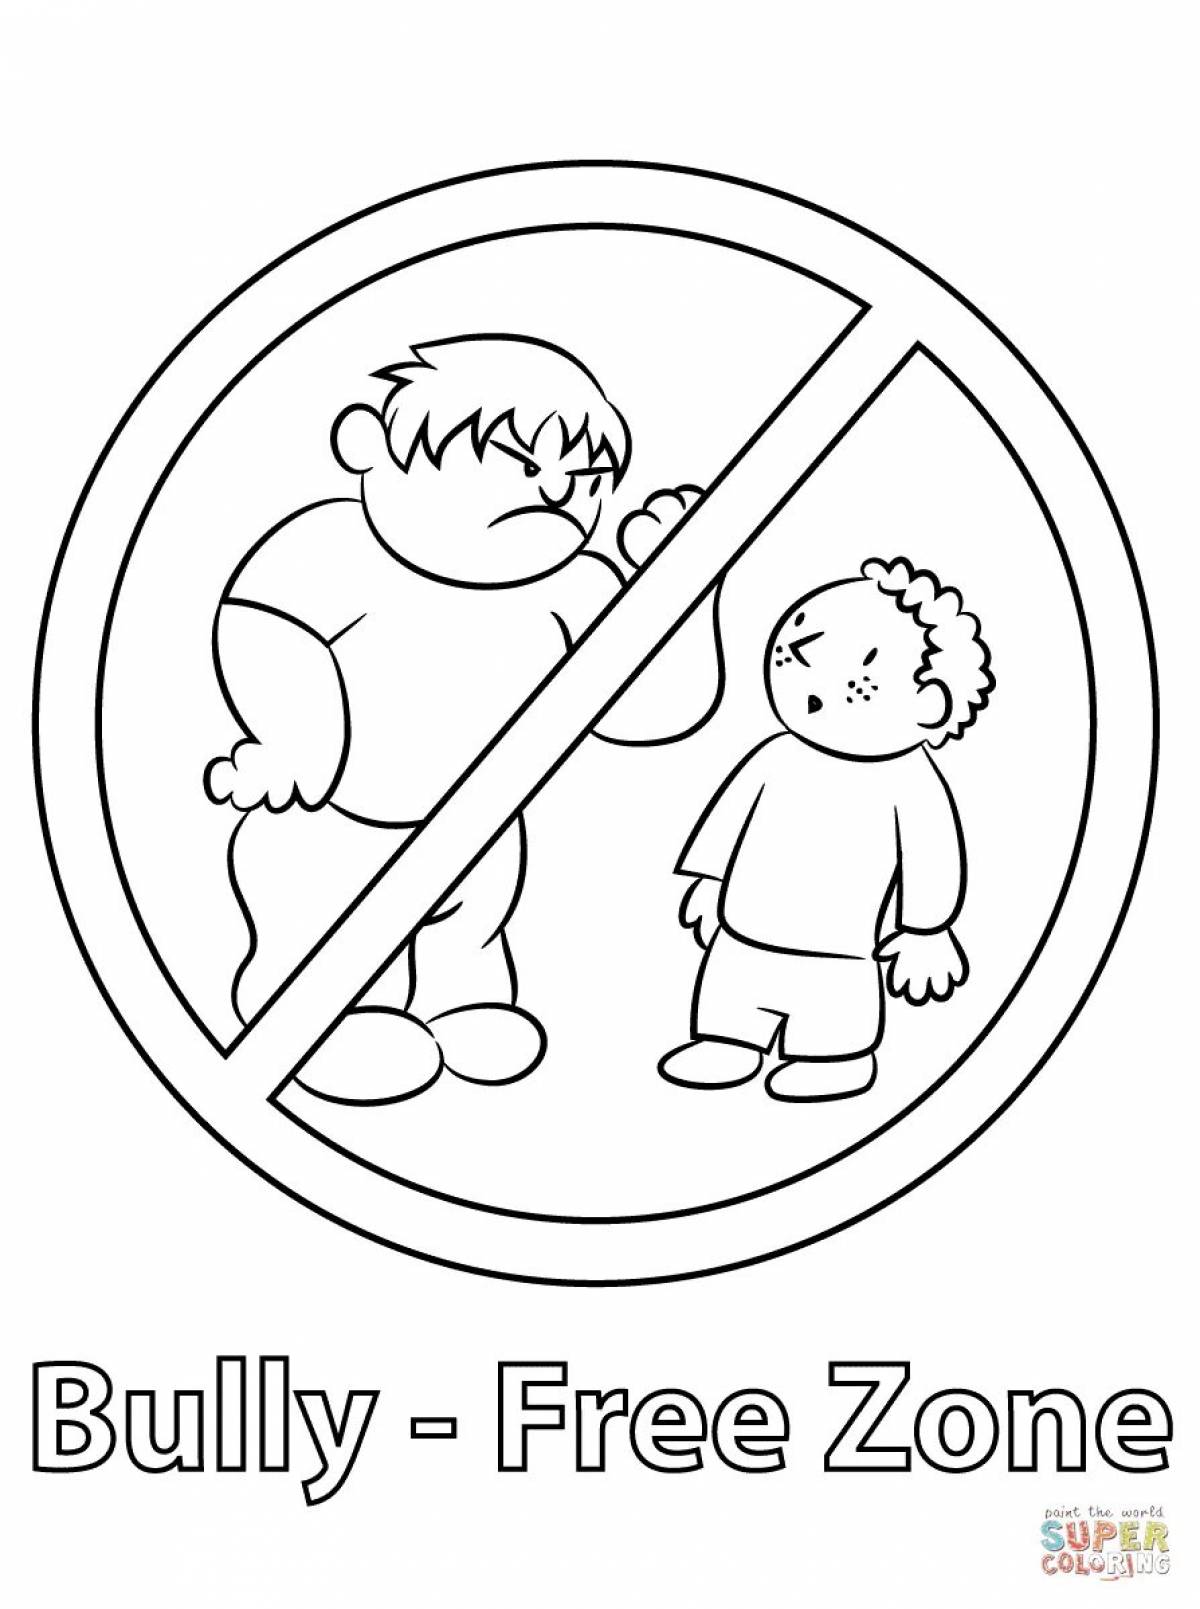 Bright stop bullying coloring page